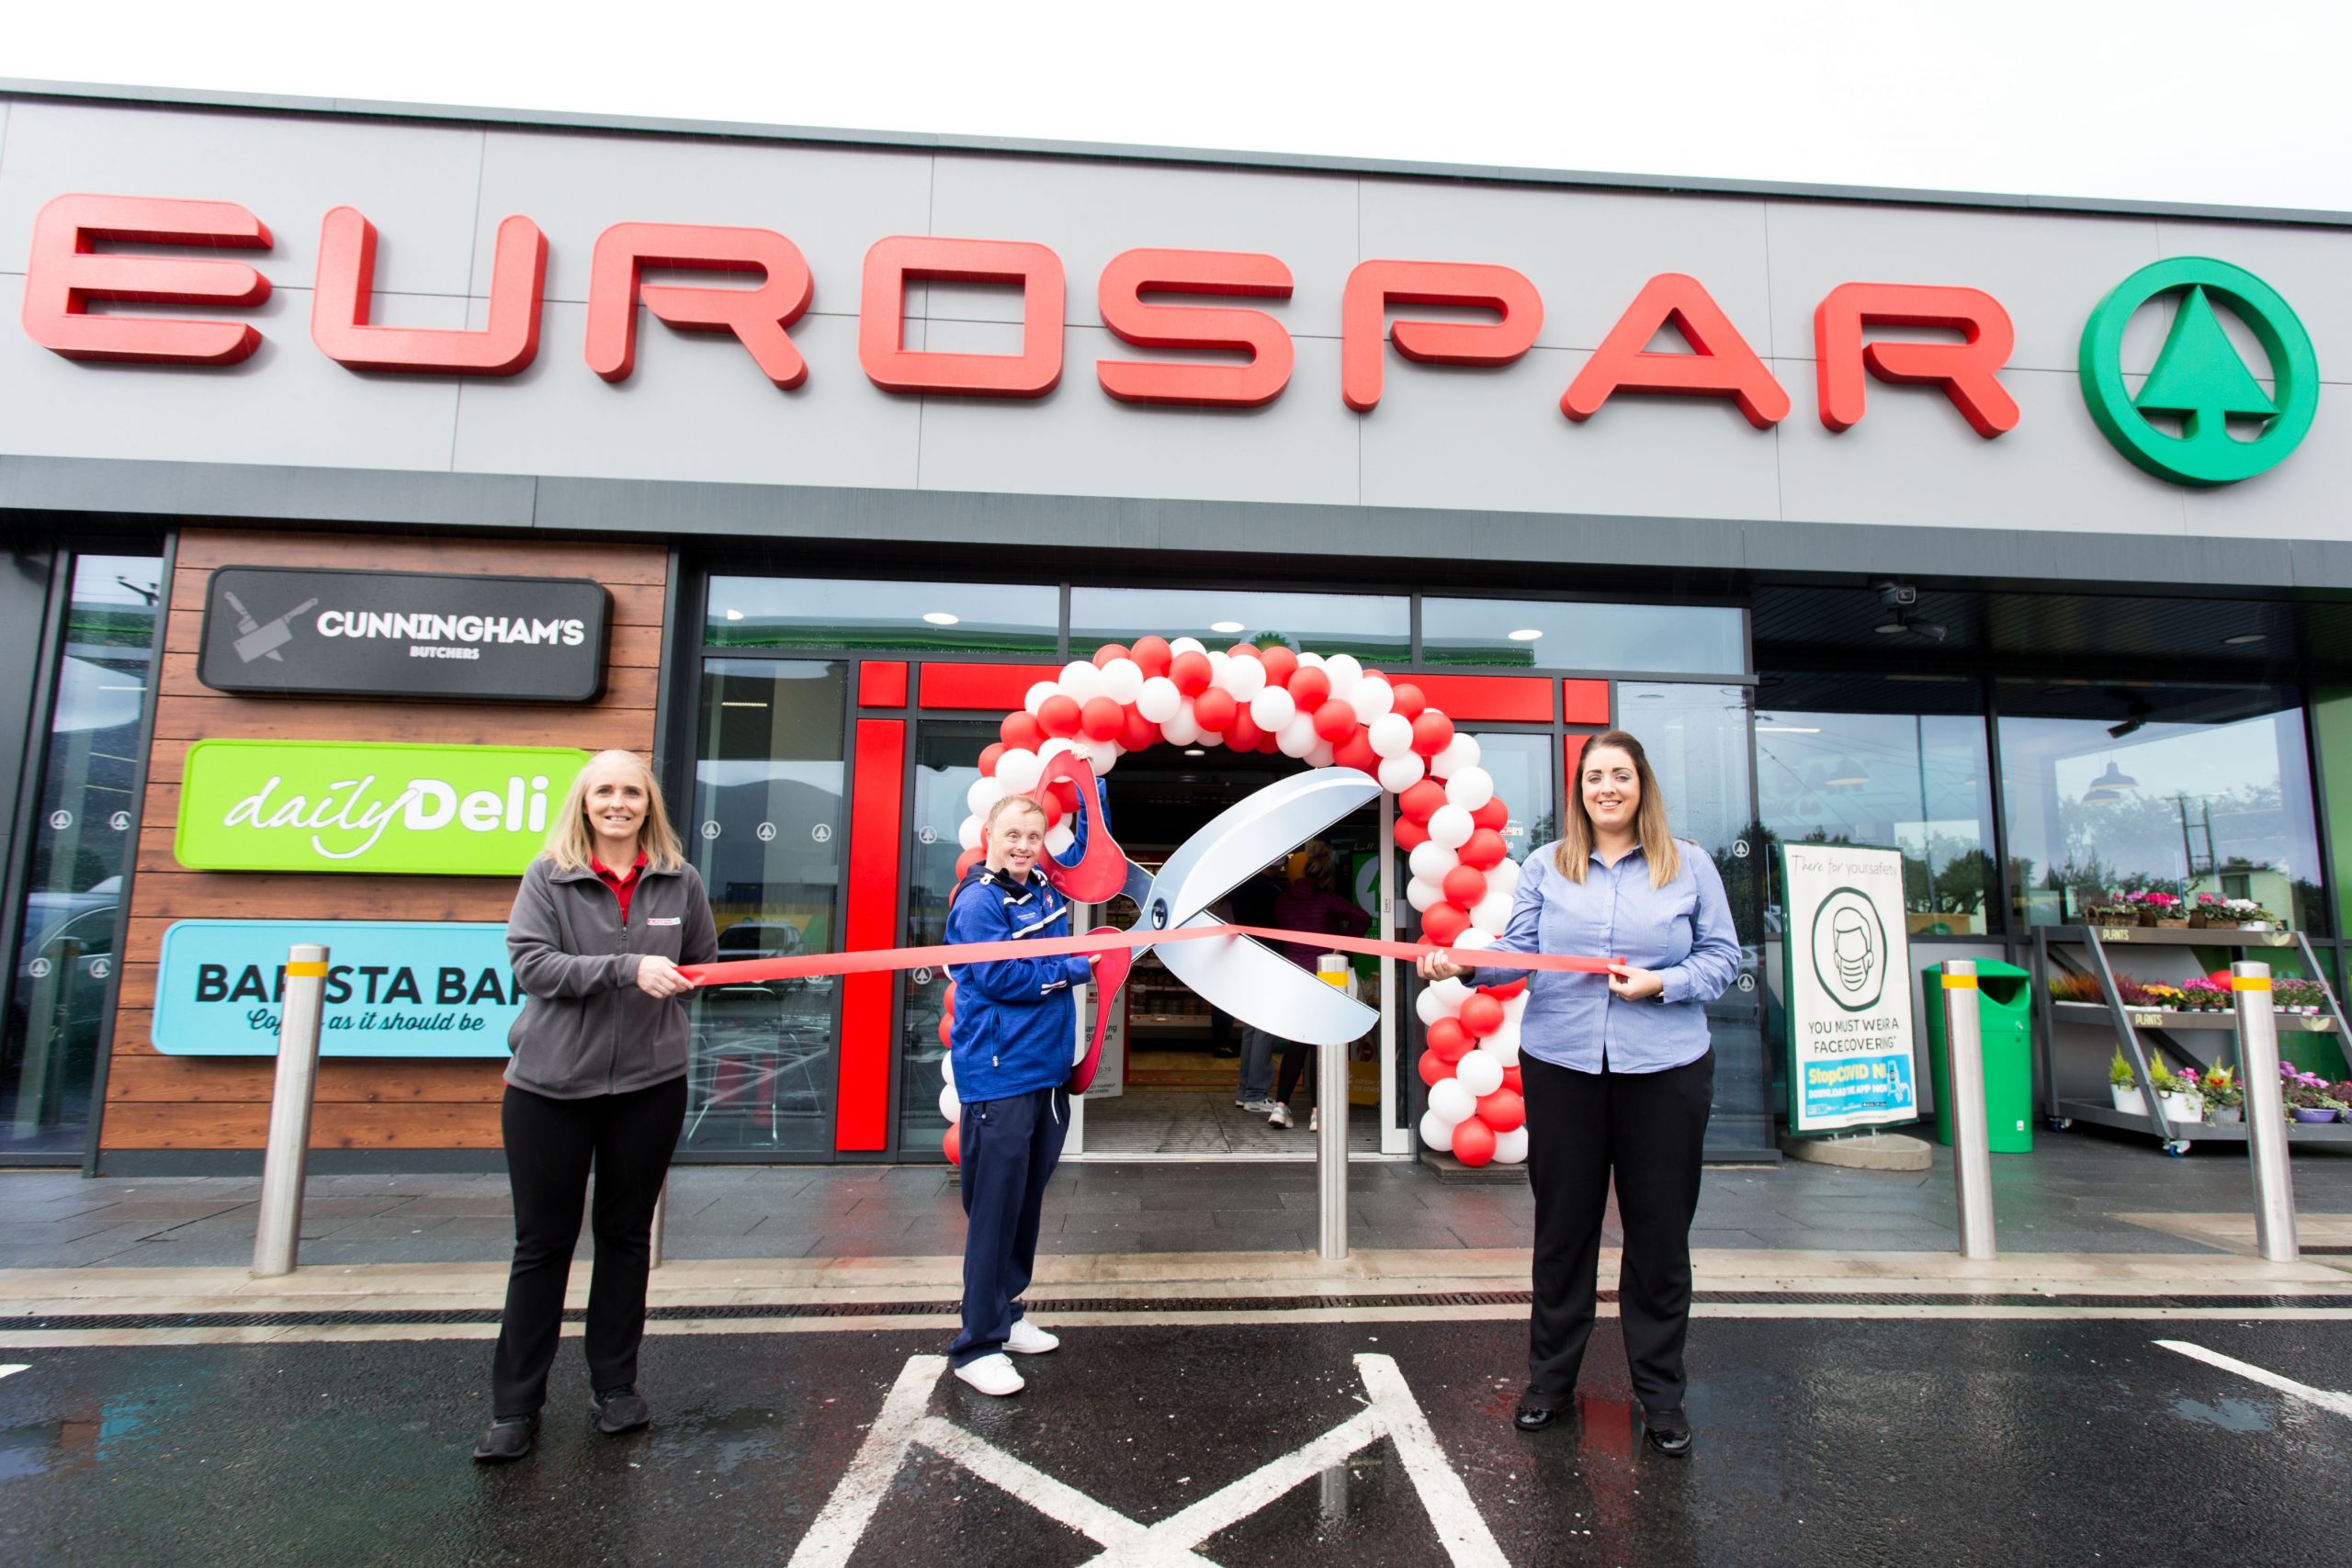 New build supermarket – an innovative shopping experience for local community